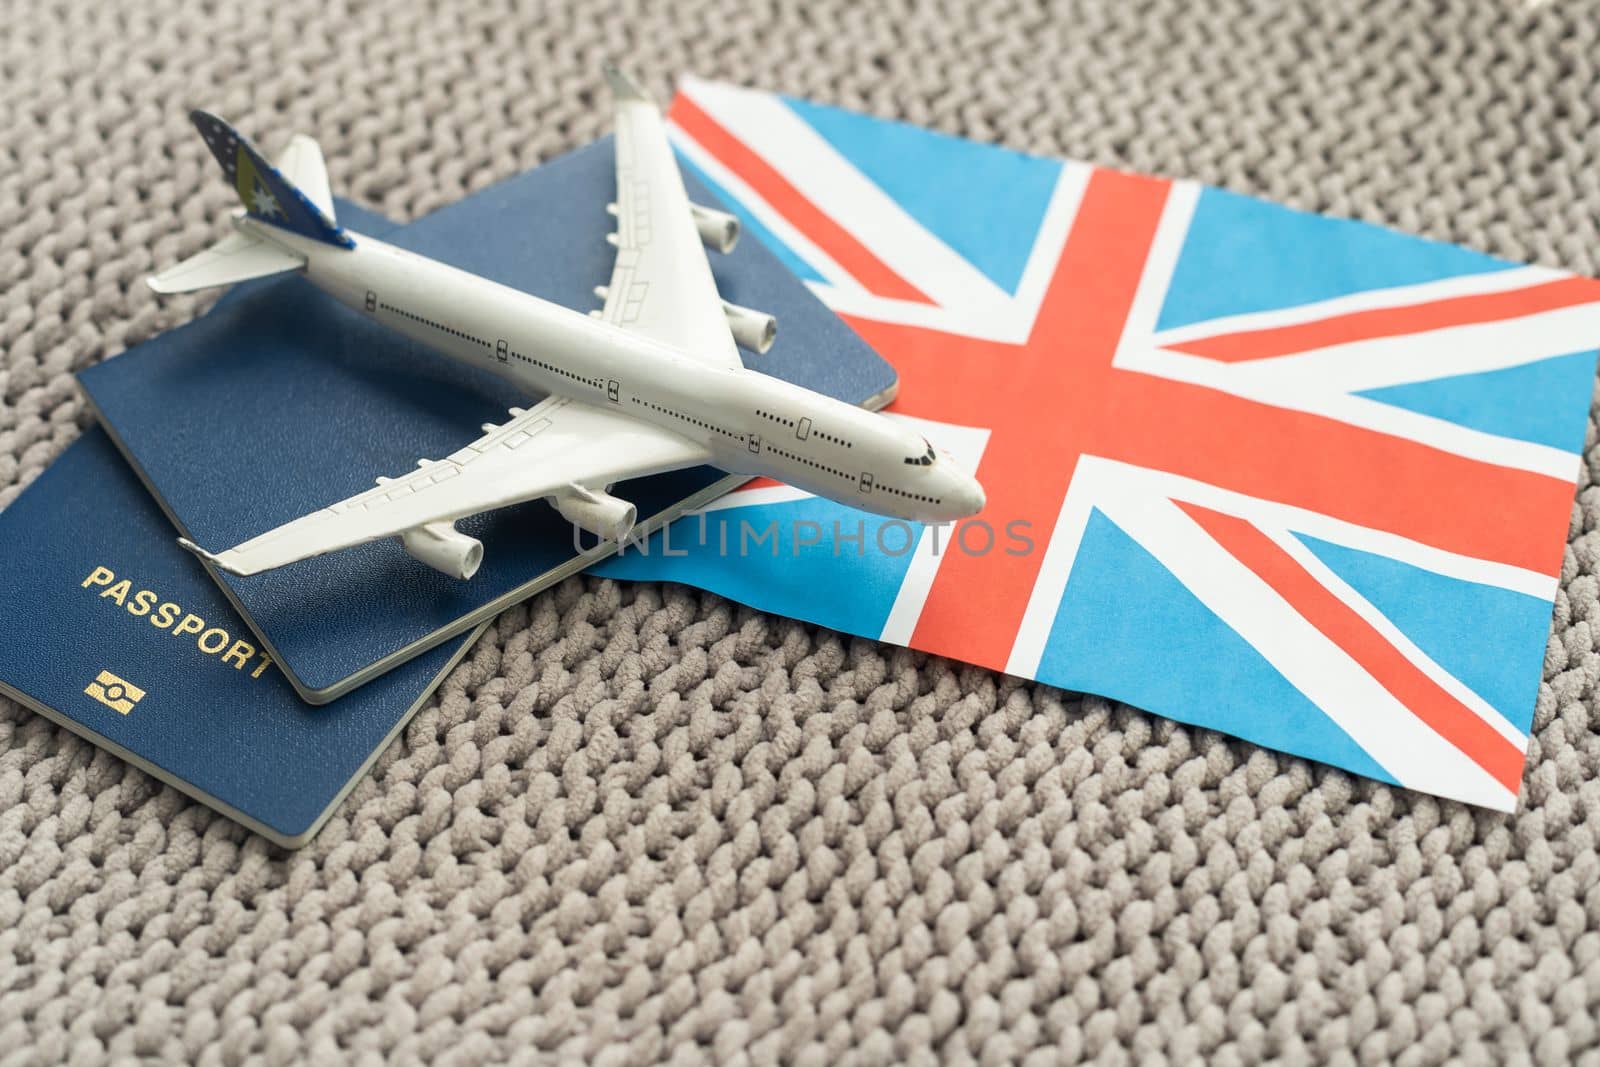 Tourim flight to the Grean Britain concept. Vacation in the United Kingdom. Composition of the UK flag, passport and toy airplane. by Andelov13